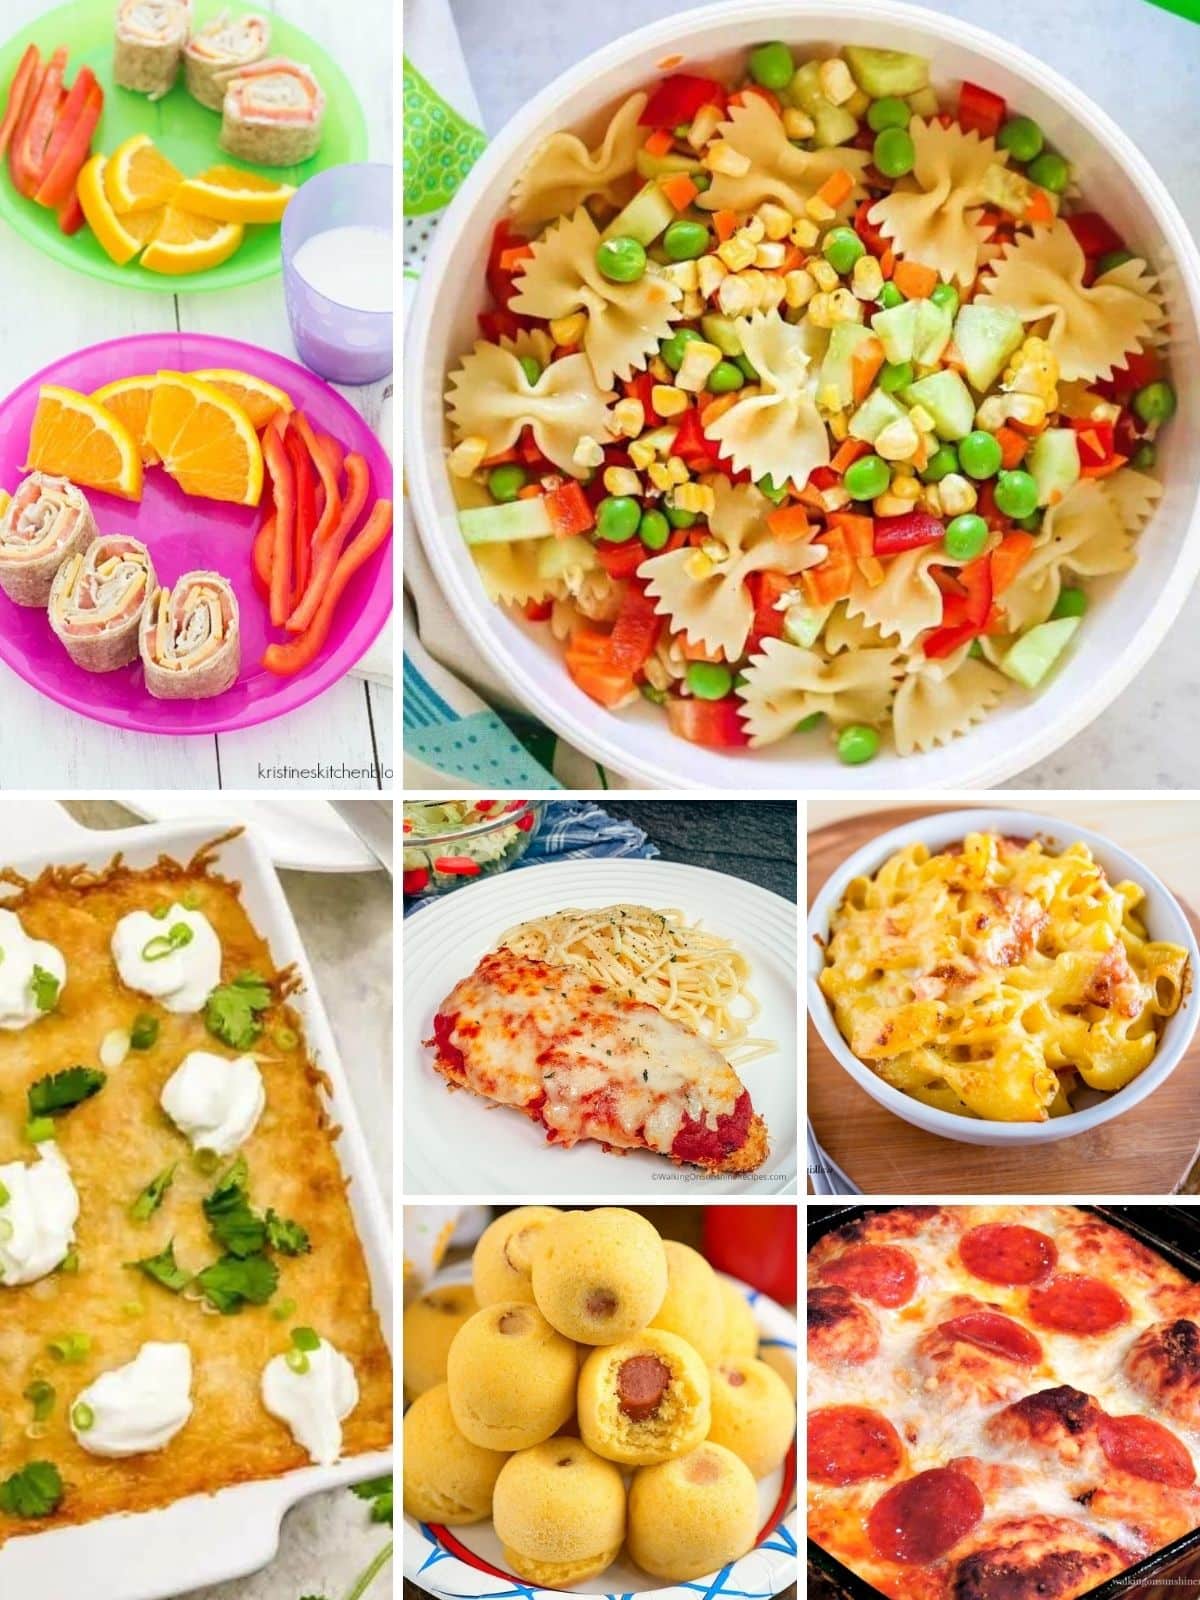 recipes for picky eaters.